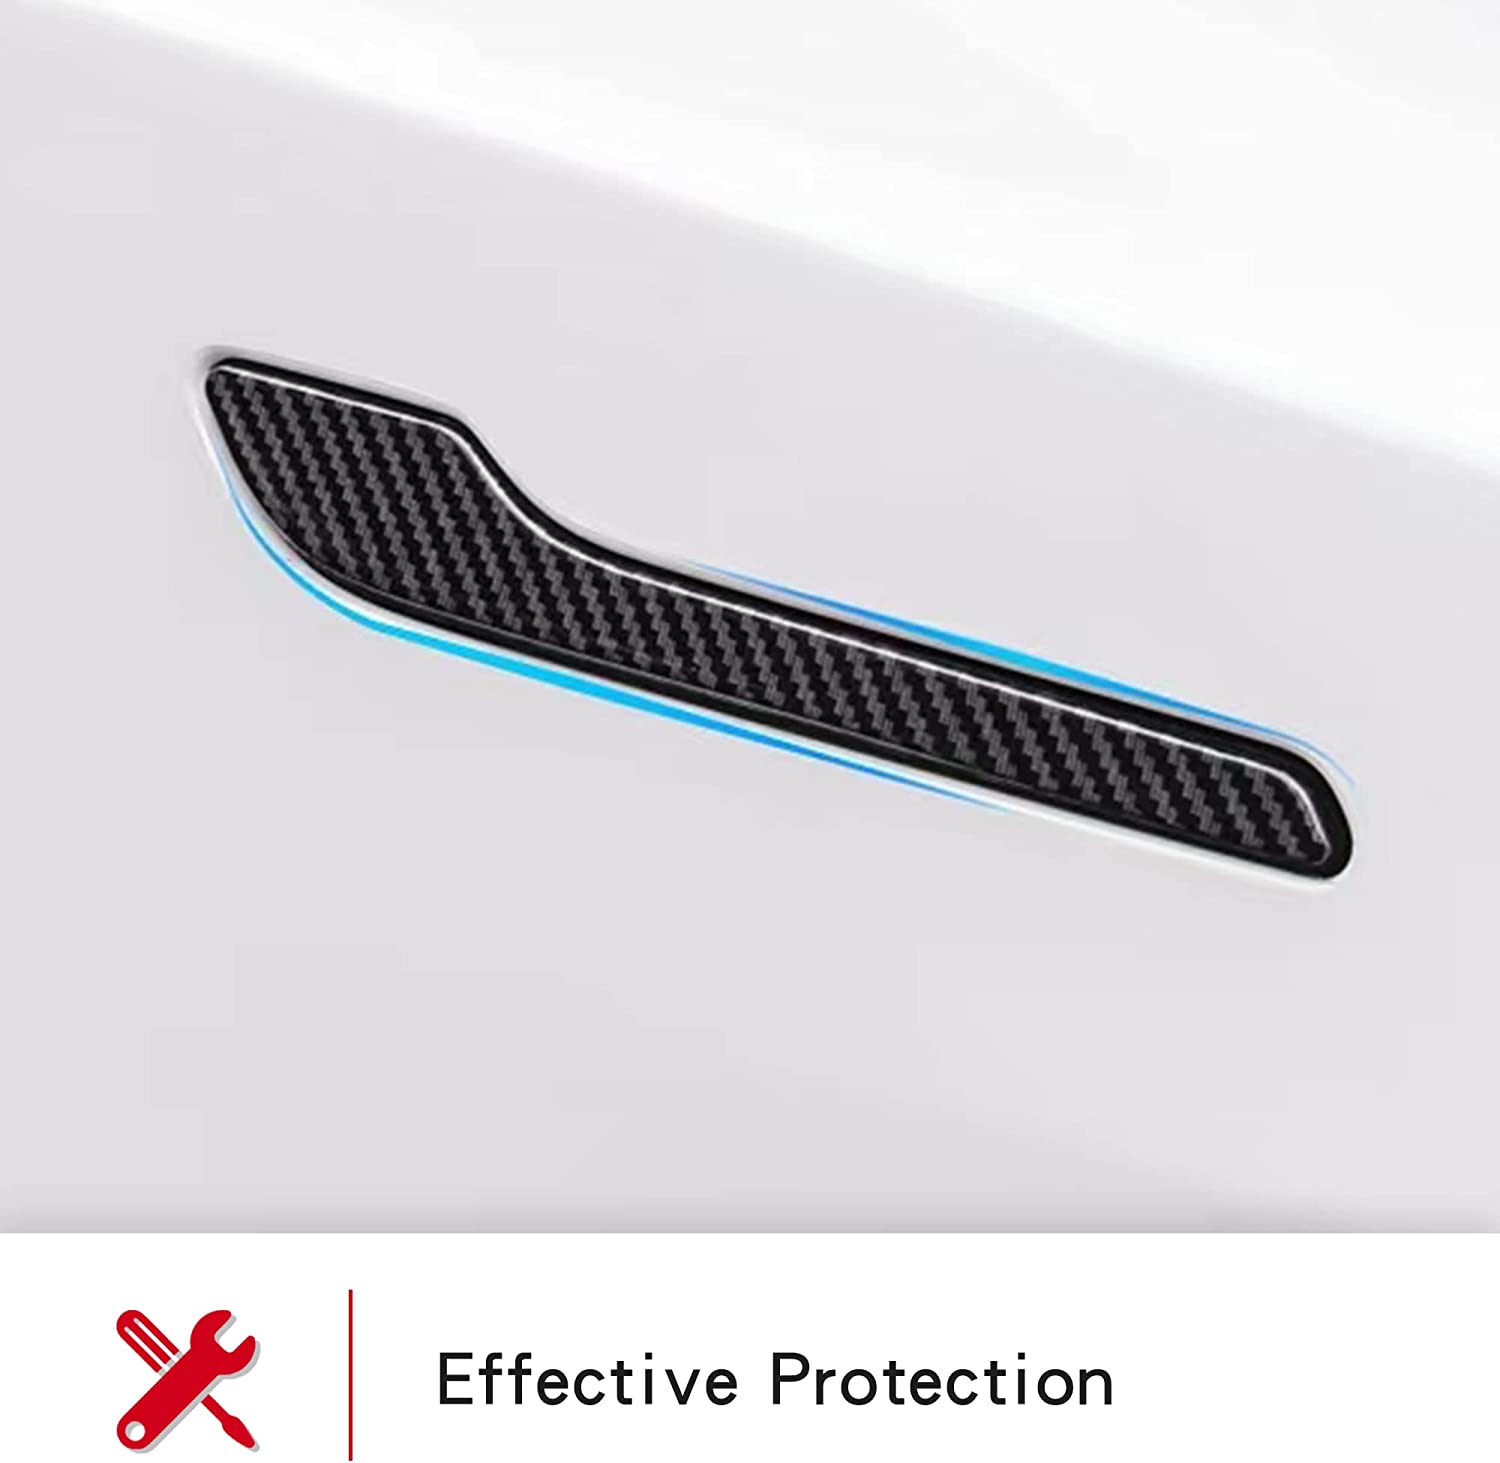 door handle covers stickers protect carbon fiber colorful tesla model 3 Y car 2022 2023 2021 2020 2019 s3xy arcoche accessories accessory aftermarket price Vehicles standard long range performance sr+ electric car rwd ev interior exterior diy decoration price elon musk must have black white red blue 5 7 seats seat